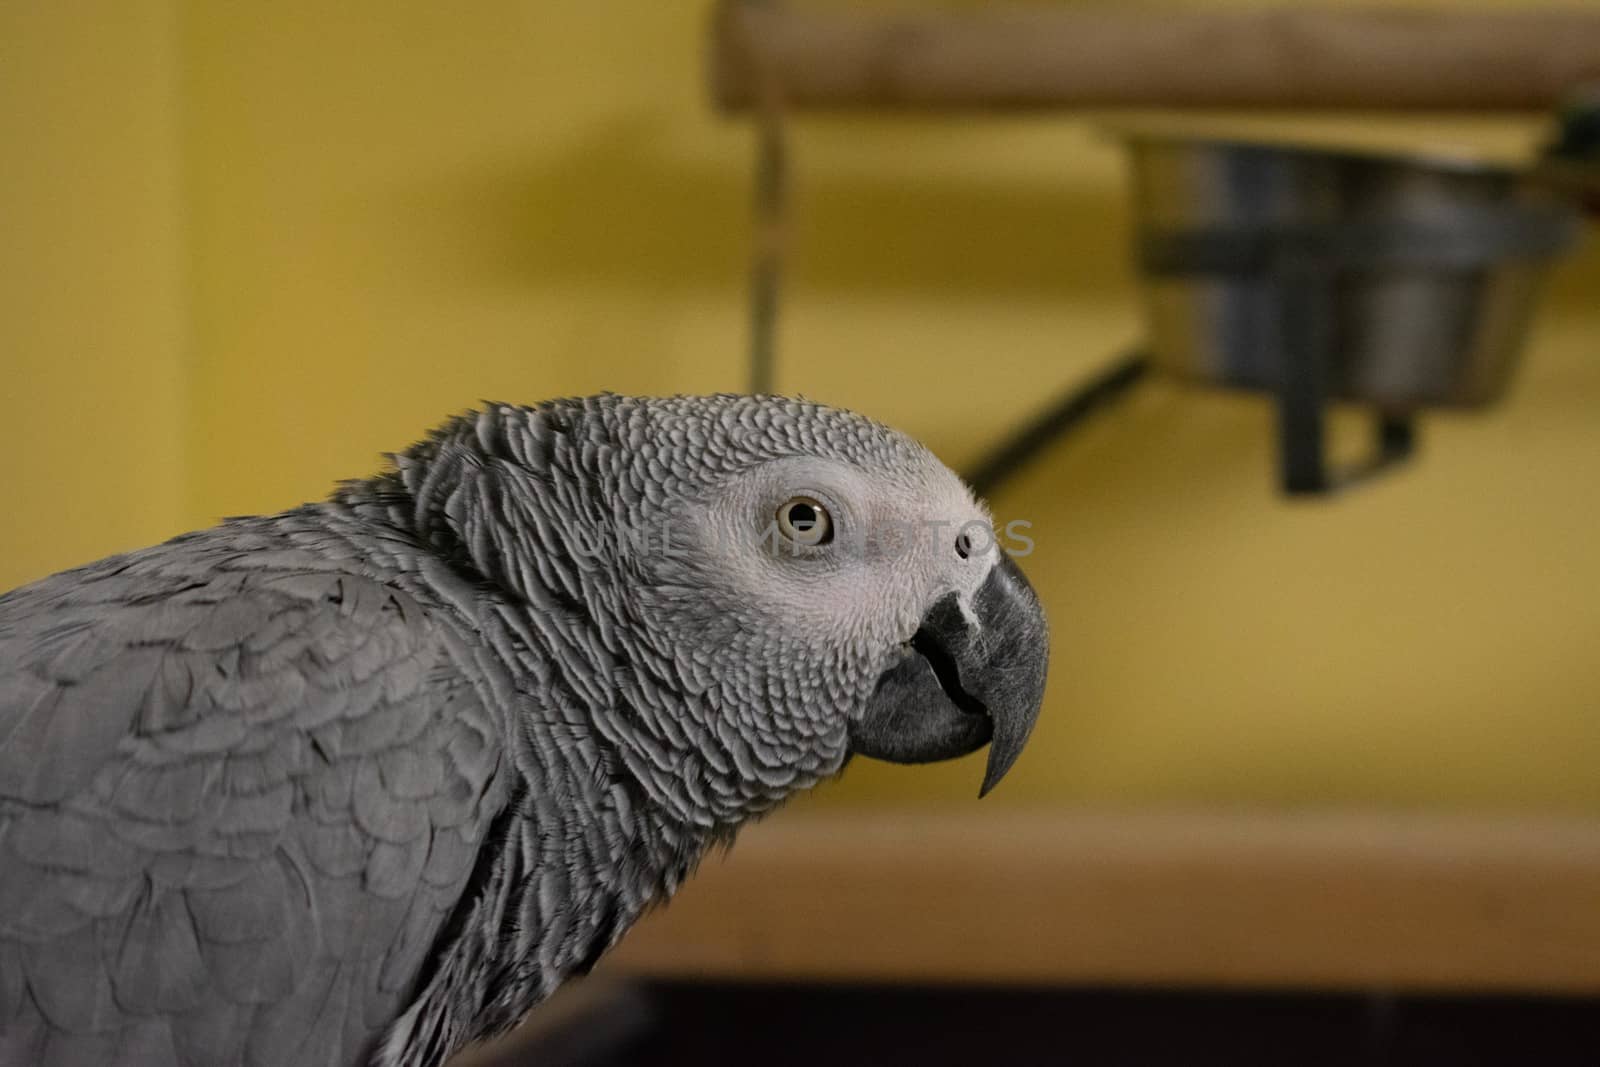 An African Gray Parrot With a Black Beak Looking at the Camera With a Yellow Wall Behind Her